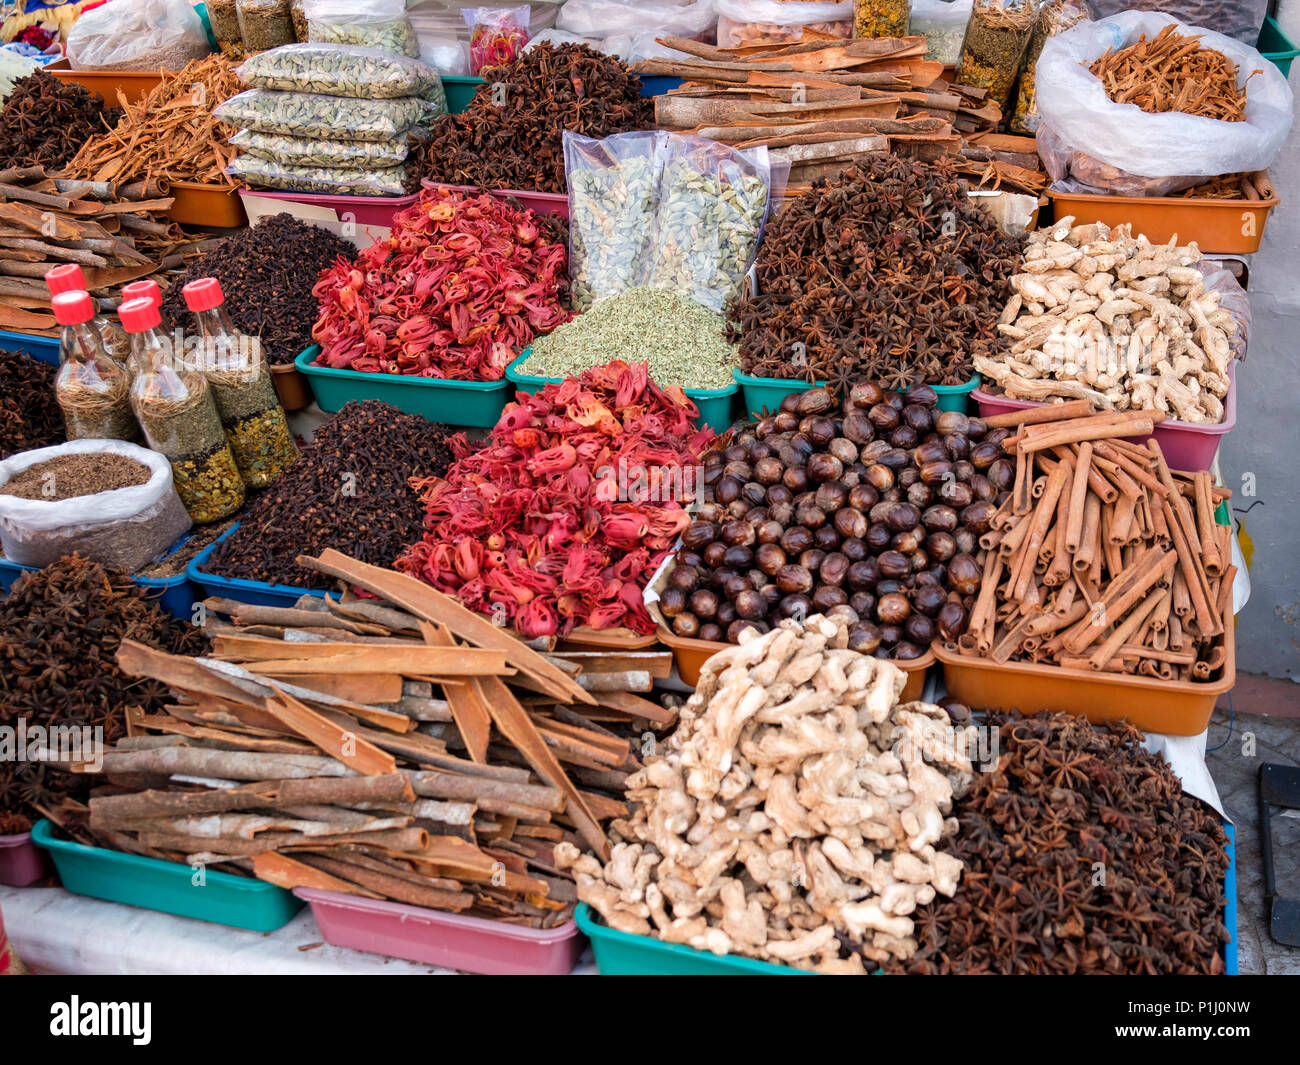 A street stall in Kerala selling typical Indian spices: cardamom, cumin, star anise, tamarind, cloves, nutmeg and mace, cinammon, etc. Stock Photo